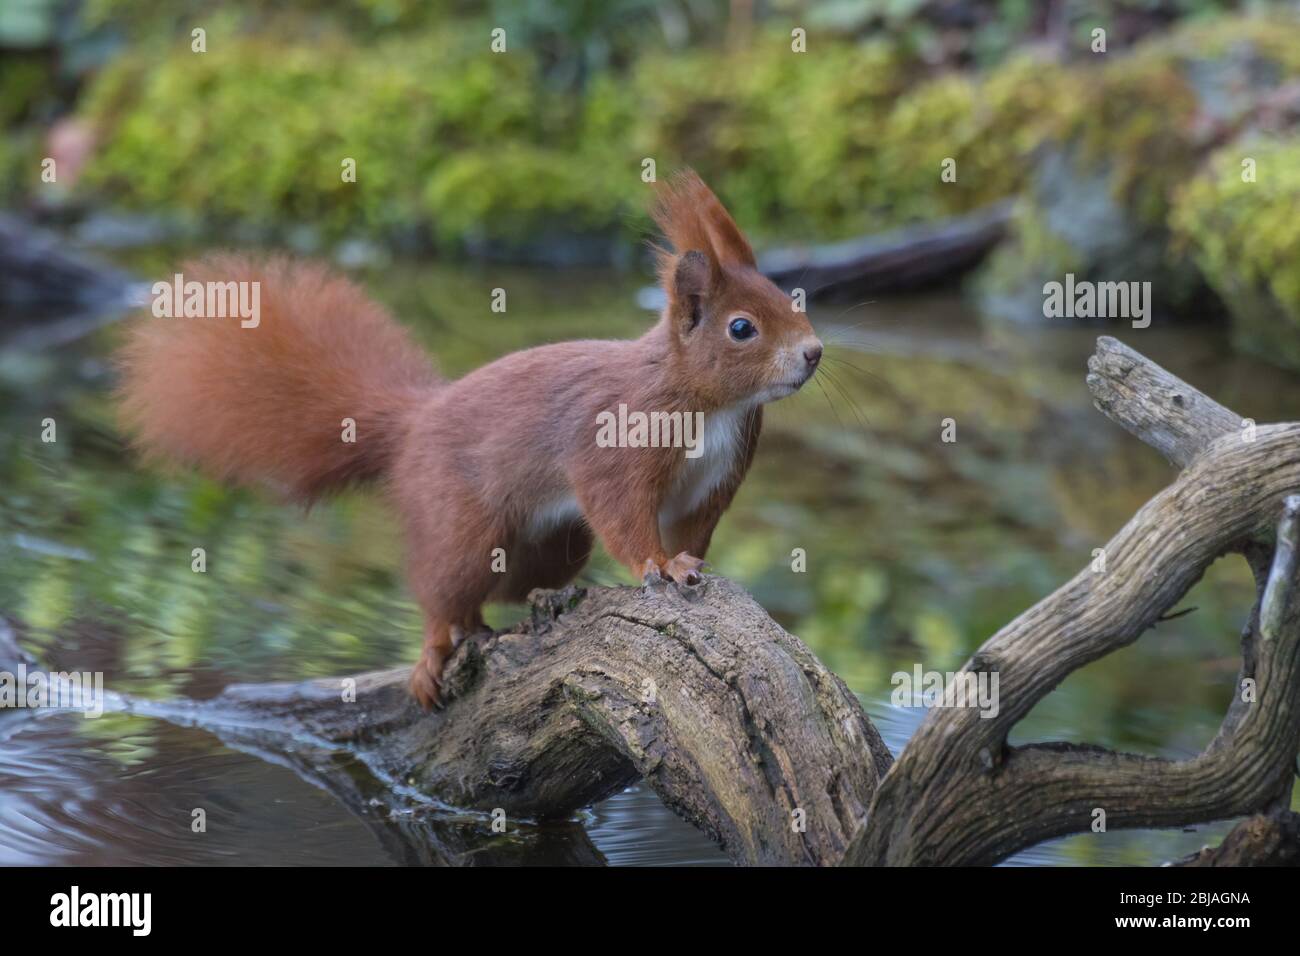 European red squirrel, Eurasian red squirrel (Sciurus vulgaris), stands on a branch at a water place in the forest, Switzerland, Sankt Gallen Stock Photo